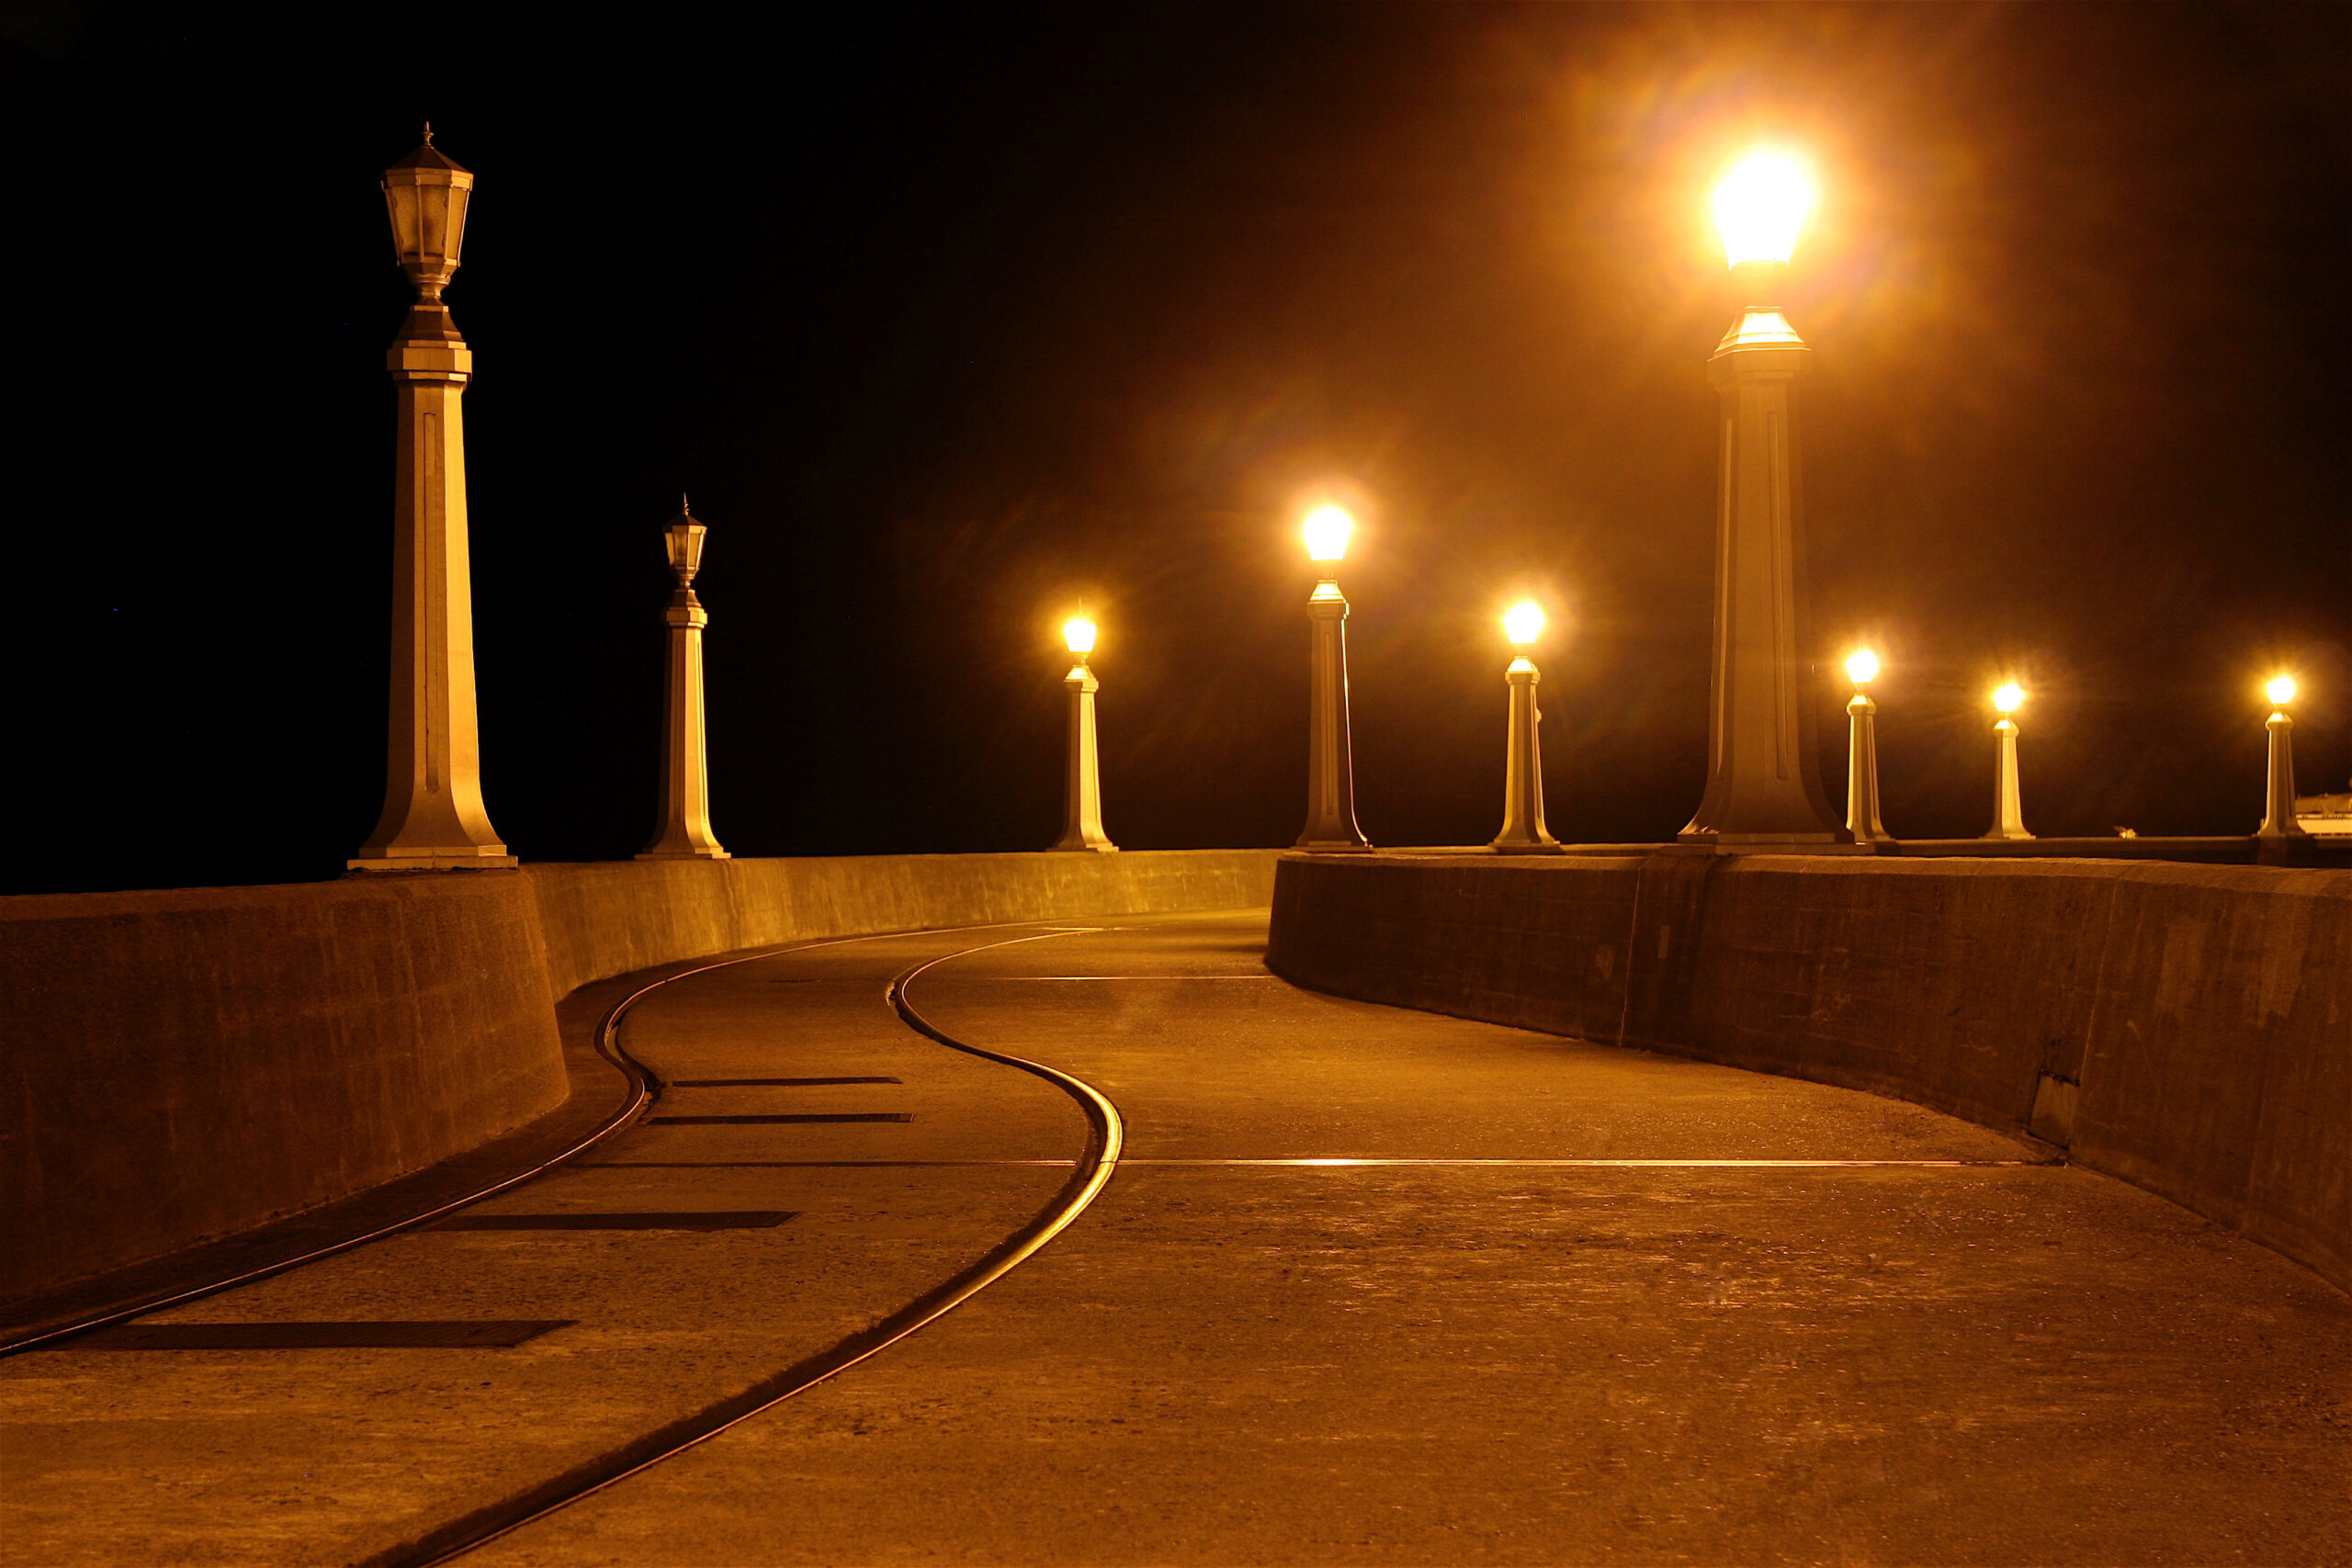 A sidewalk with light poles and a train track.